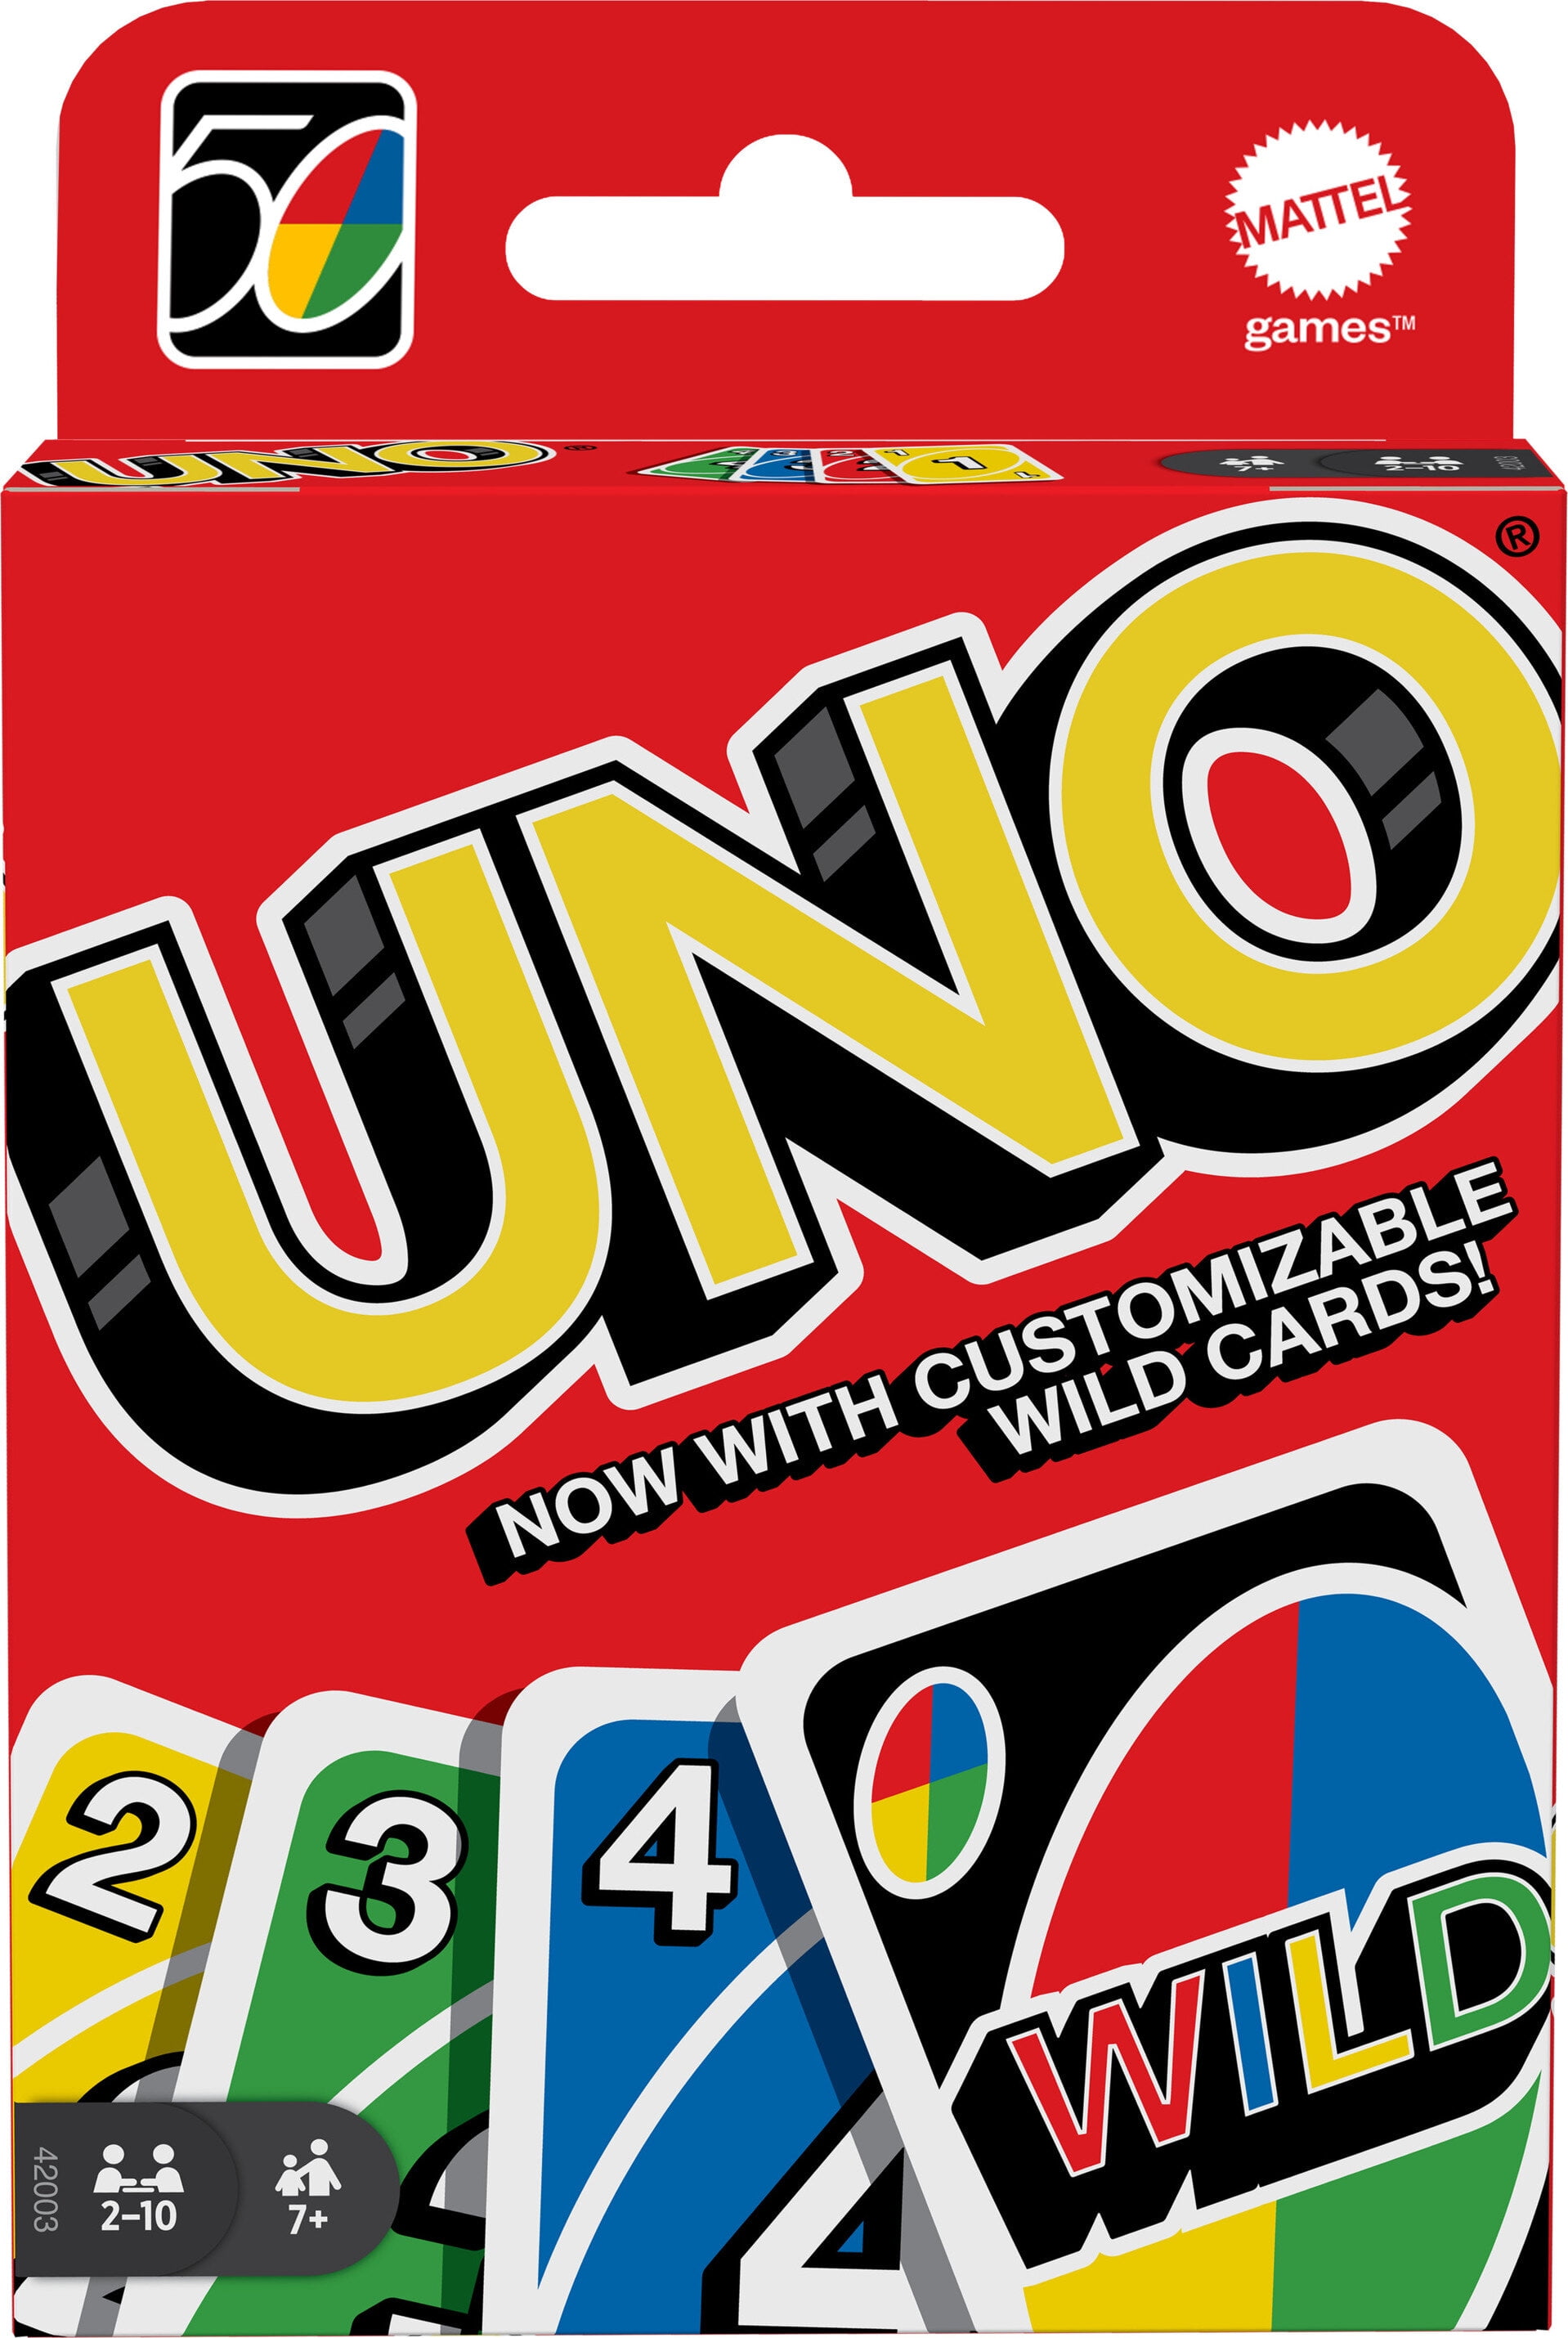 UNO Card Game for Kids, Adults & Family Game Night, Original UNO Game of Matching Colors & Numbers $4.97